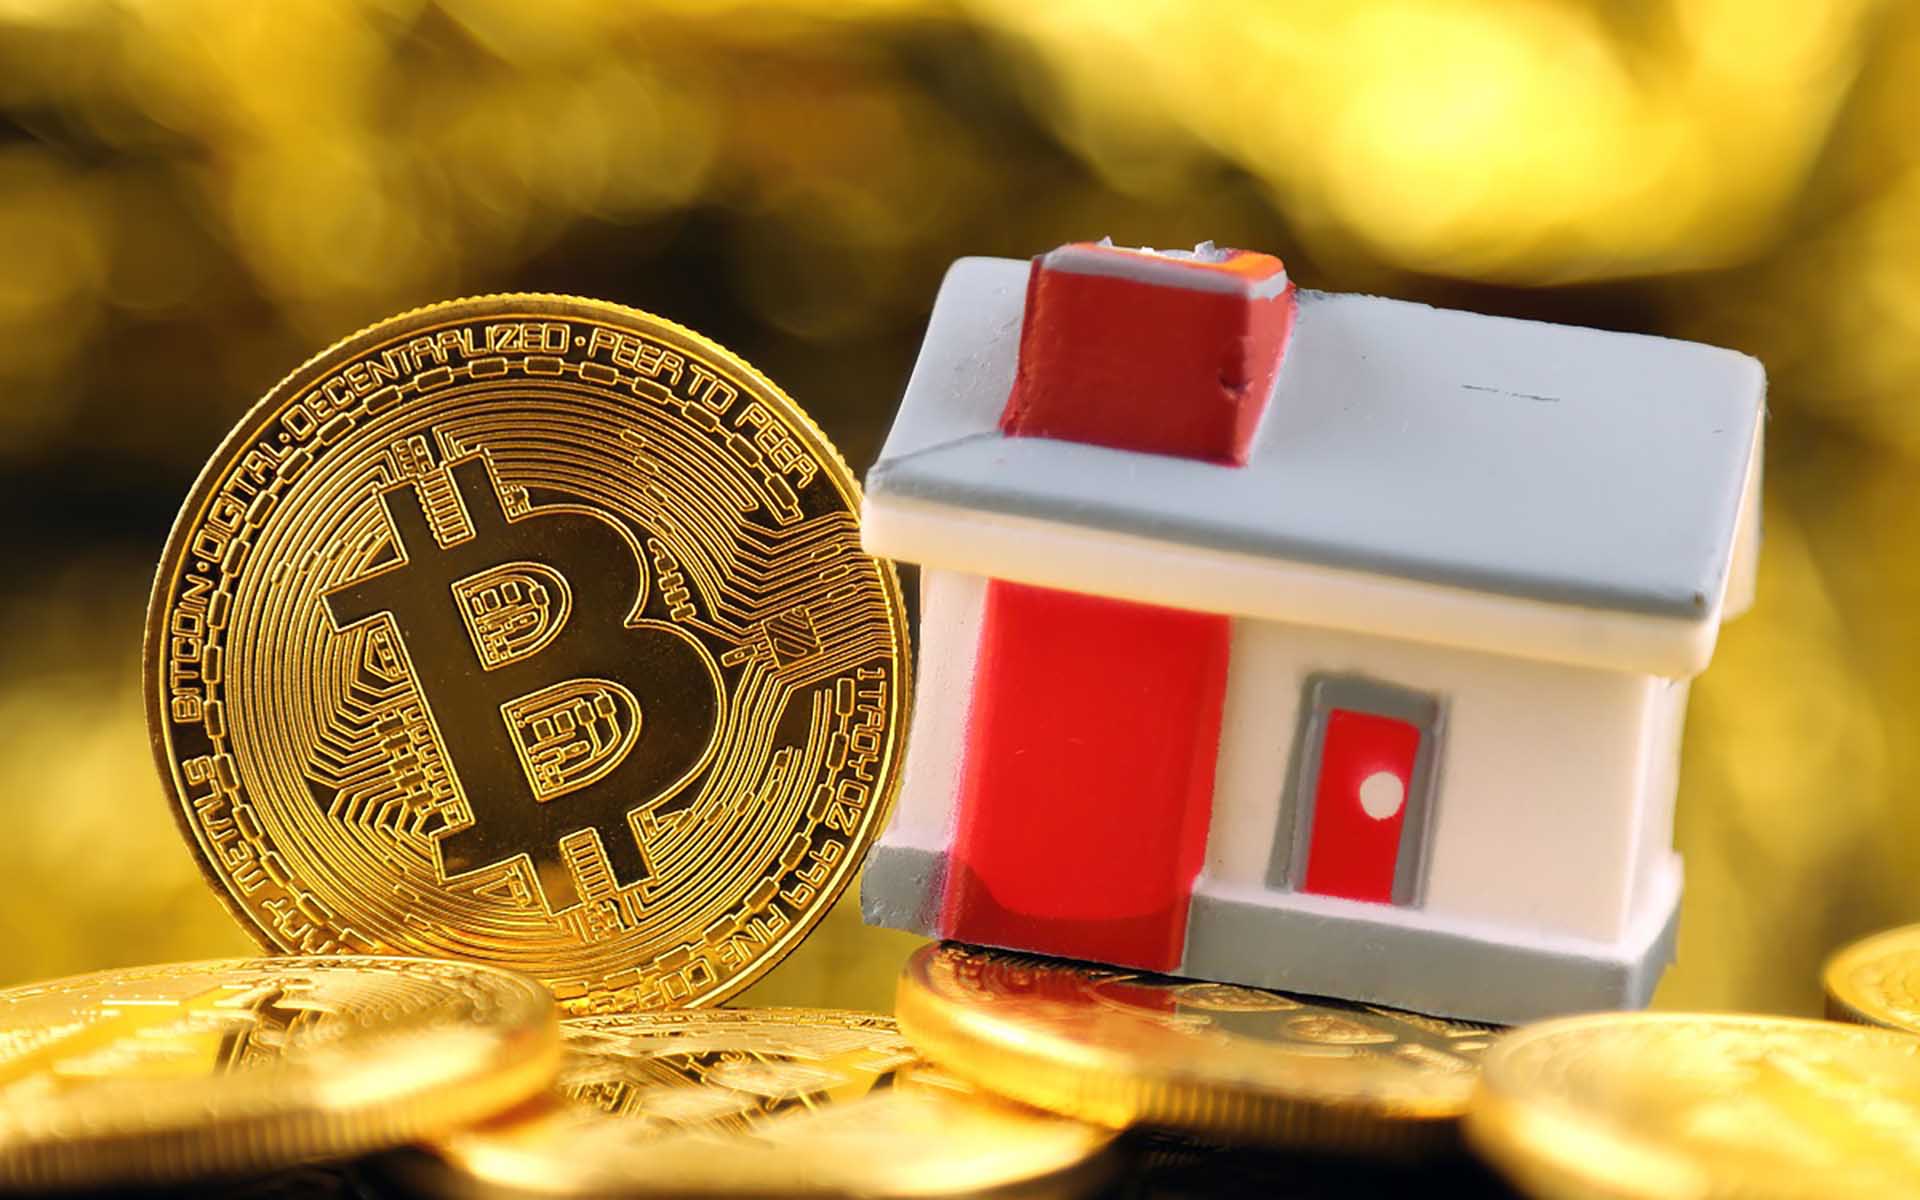 Bitcoin and real estate bid ask price forex market